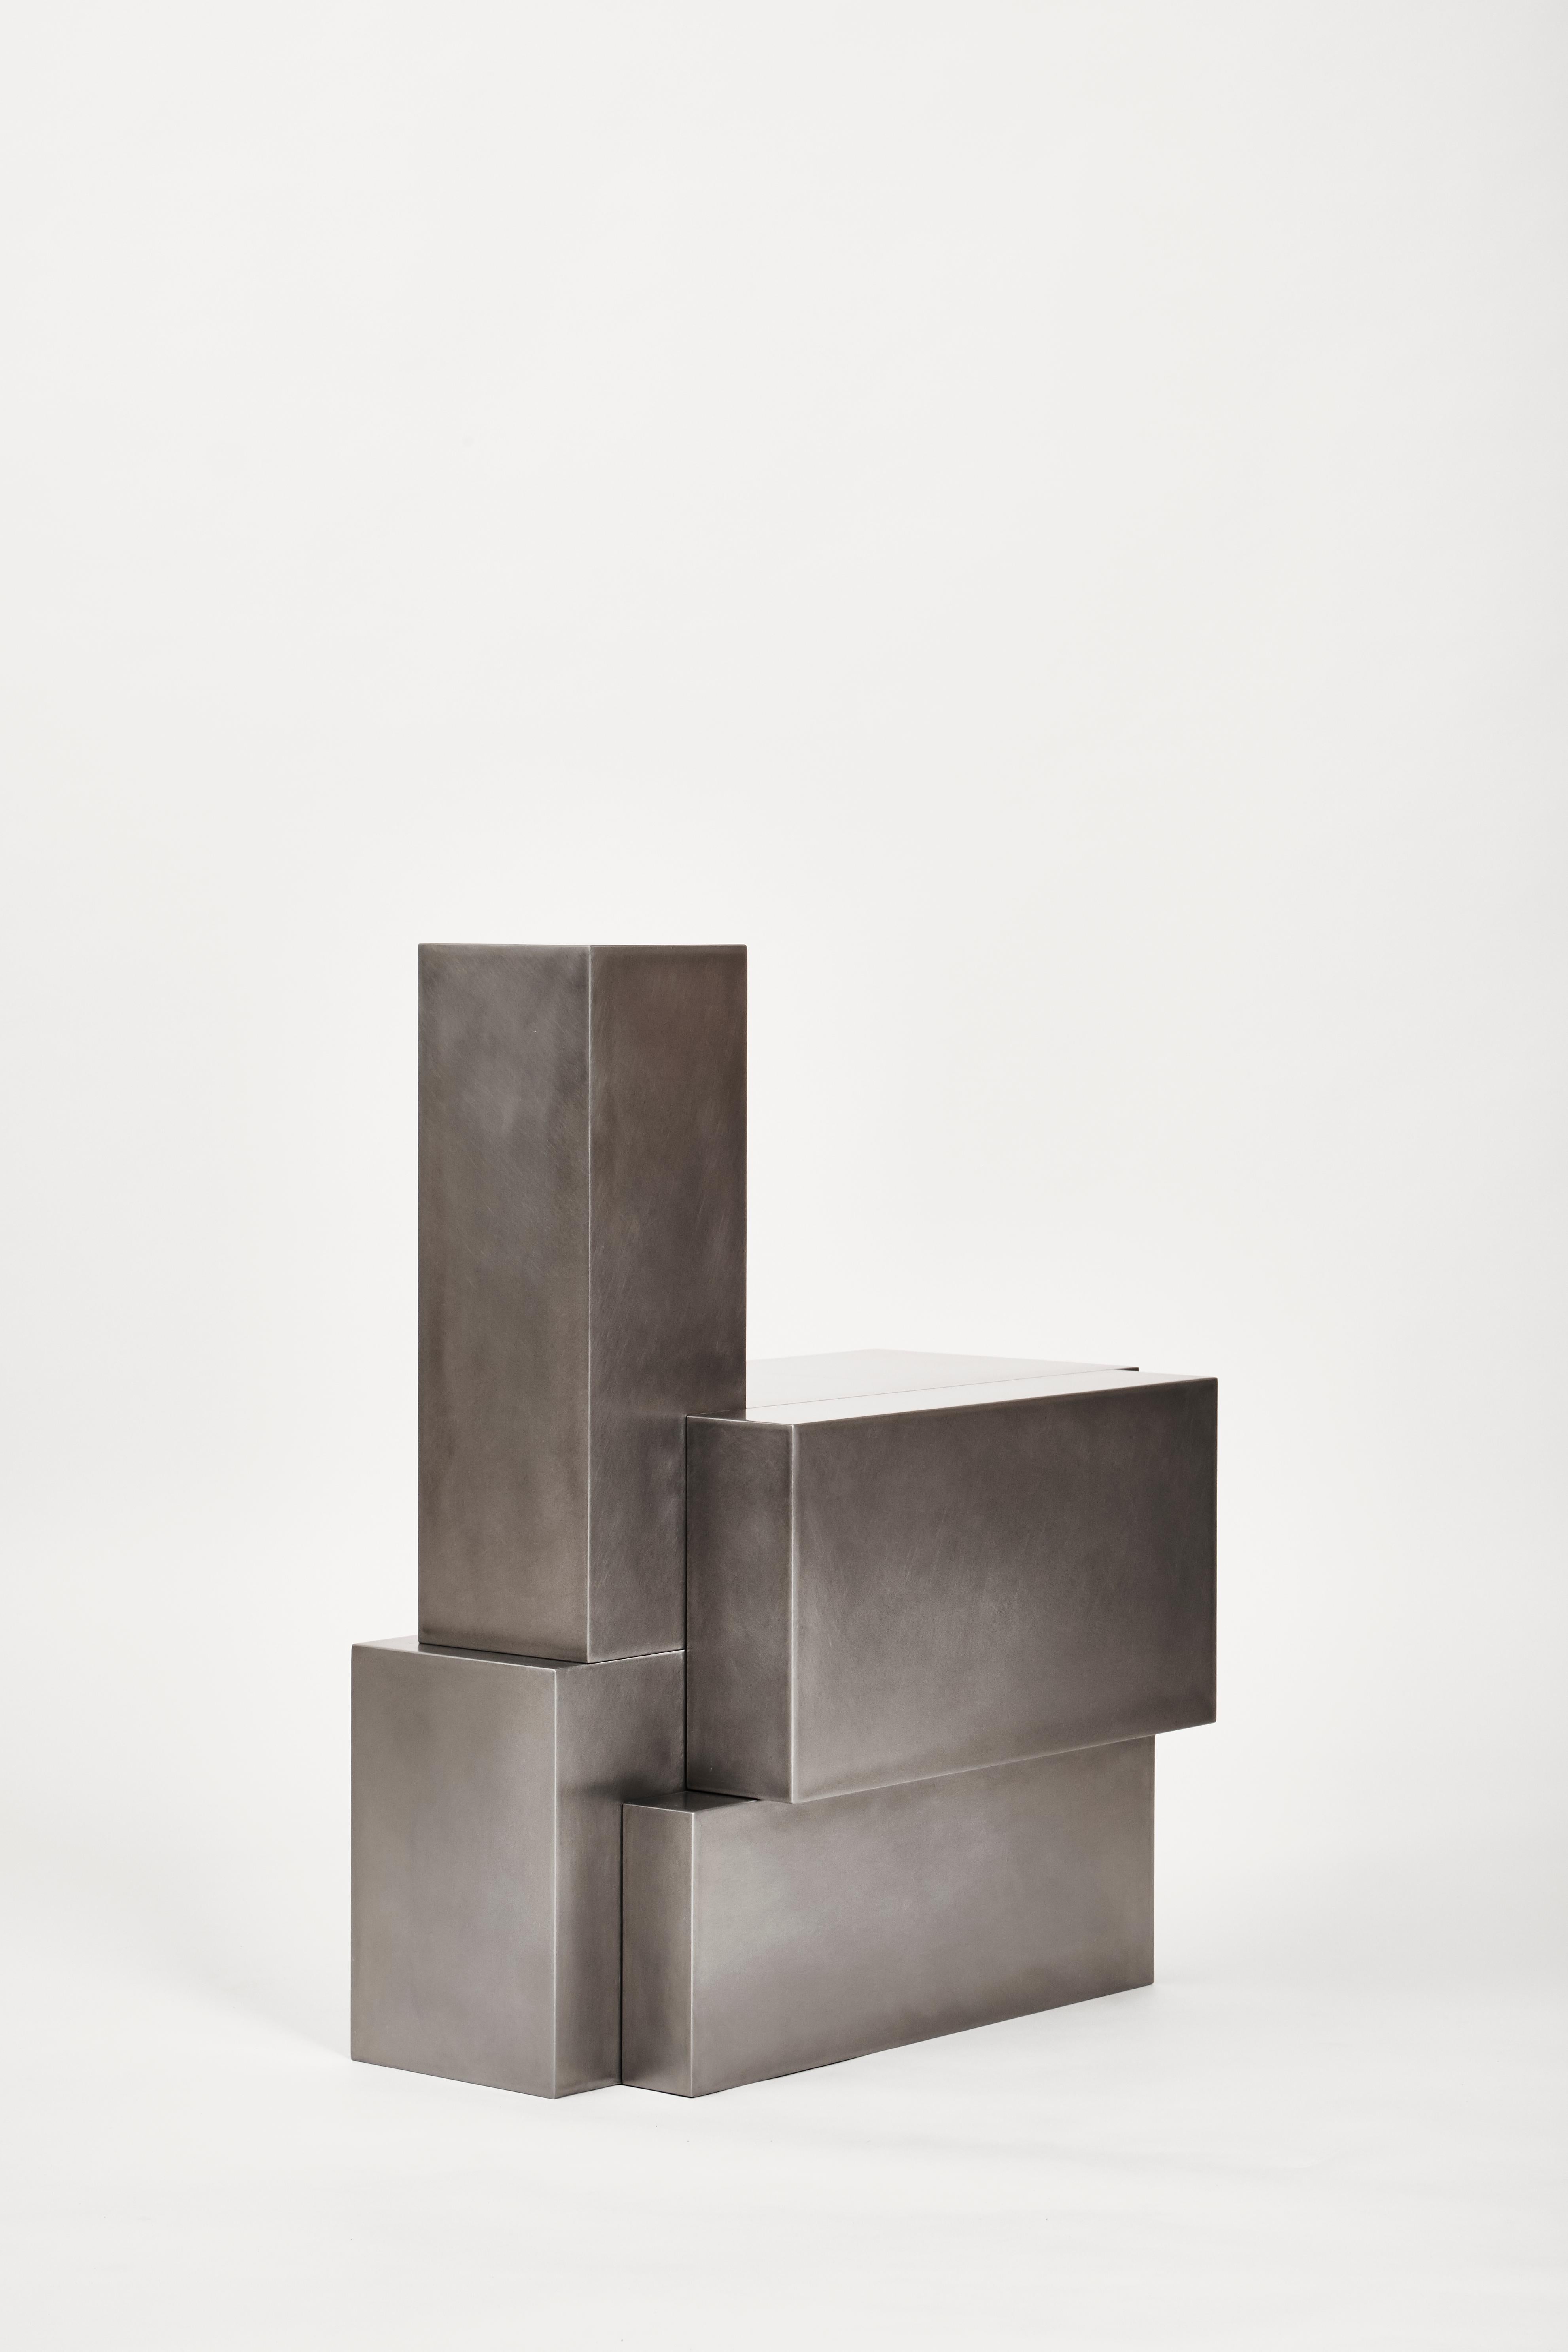 Layered steel stool by Hyungshin Hwang
2020
Dimensions: D 33 x W 60 x H 72 cm
Materials: Stainless steel

Layered Series is the main theme and concept of work of Hwang, who continues his experiment which is based on architectural composition of